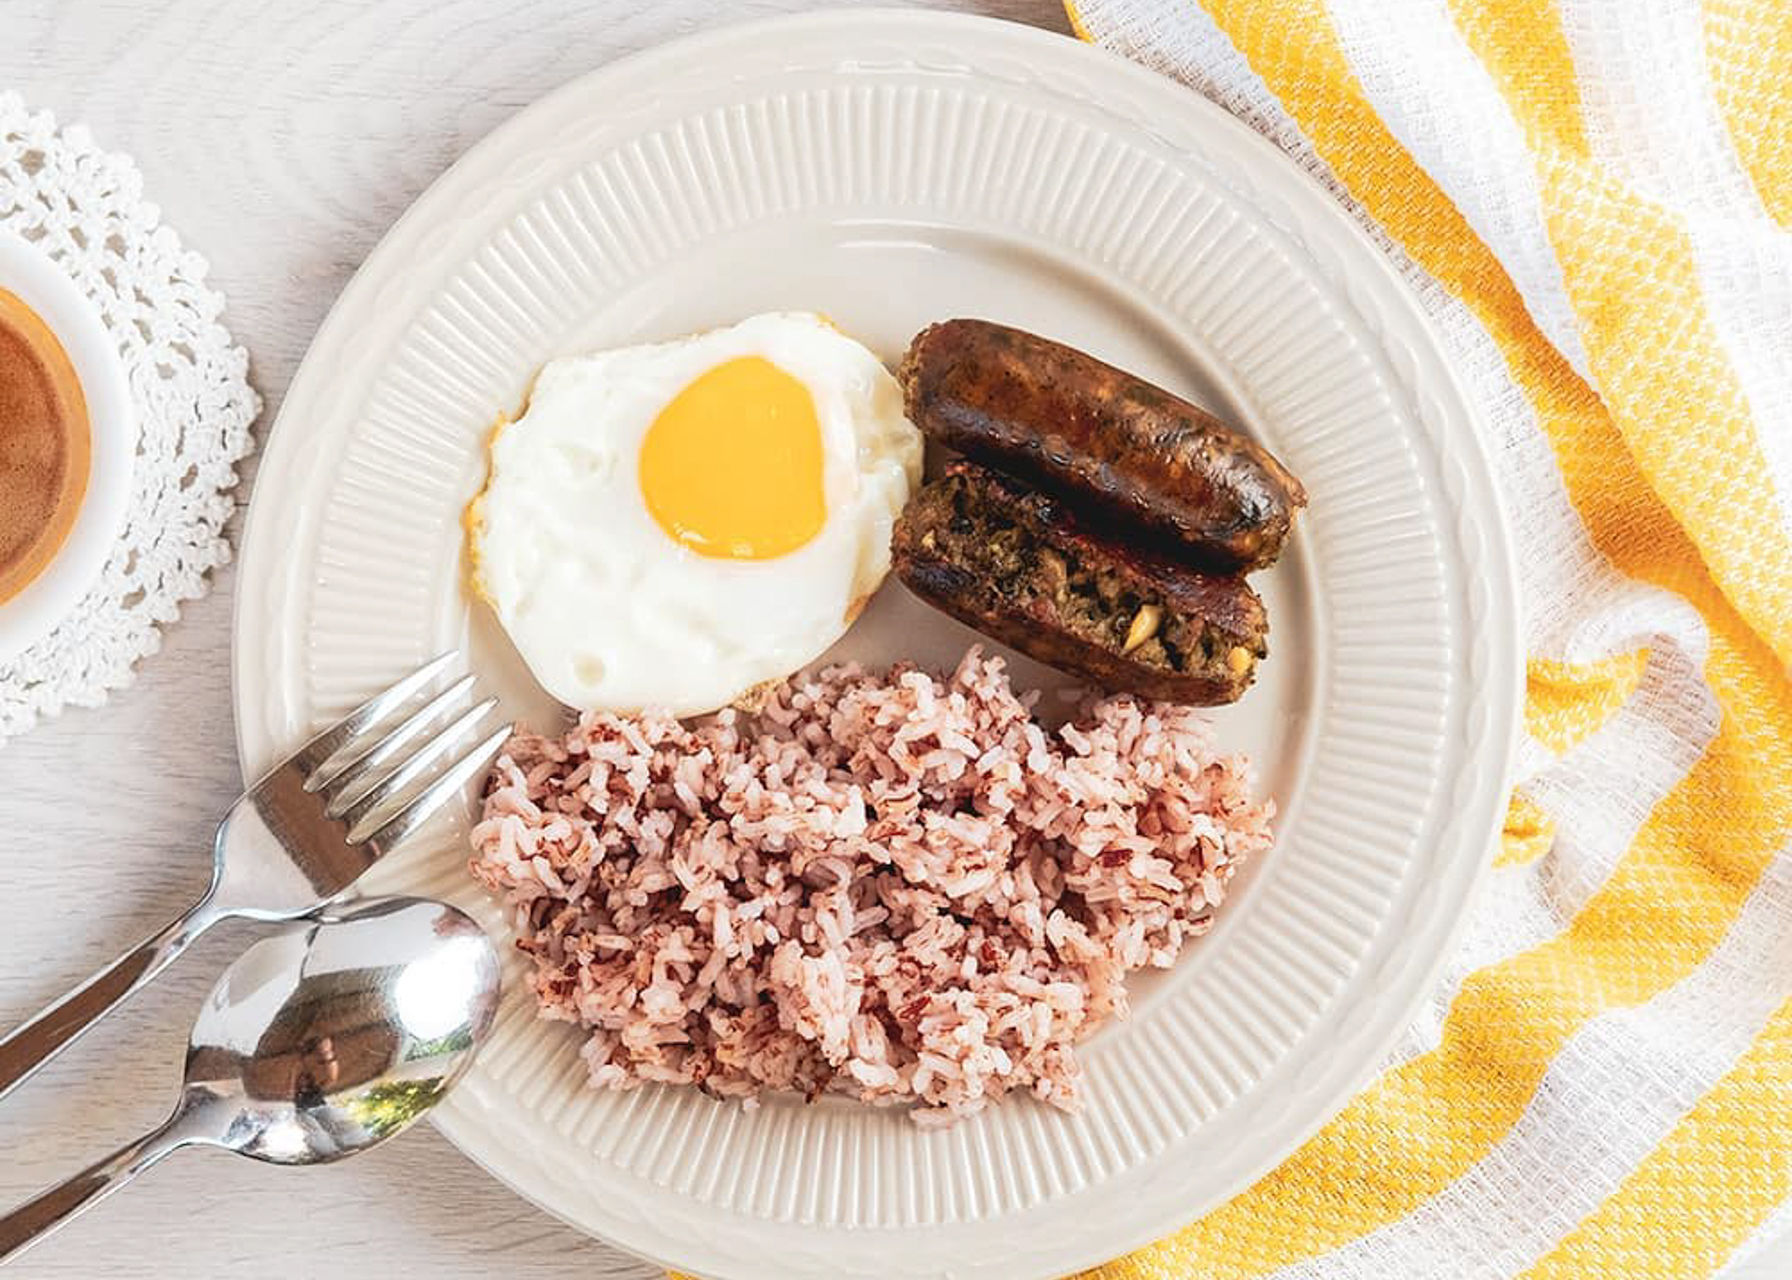 Laing Longganisa Exists and We Know Where You Can Order It!